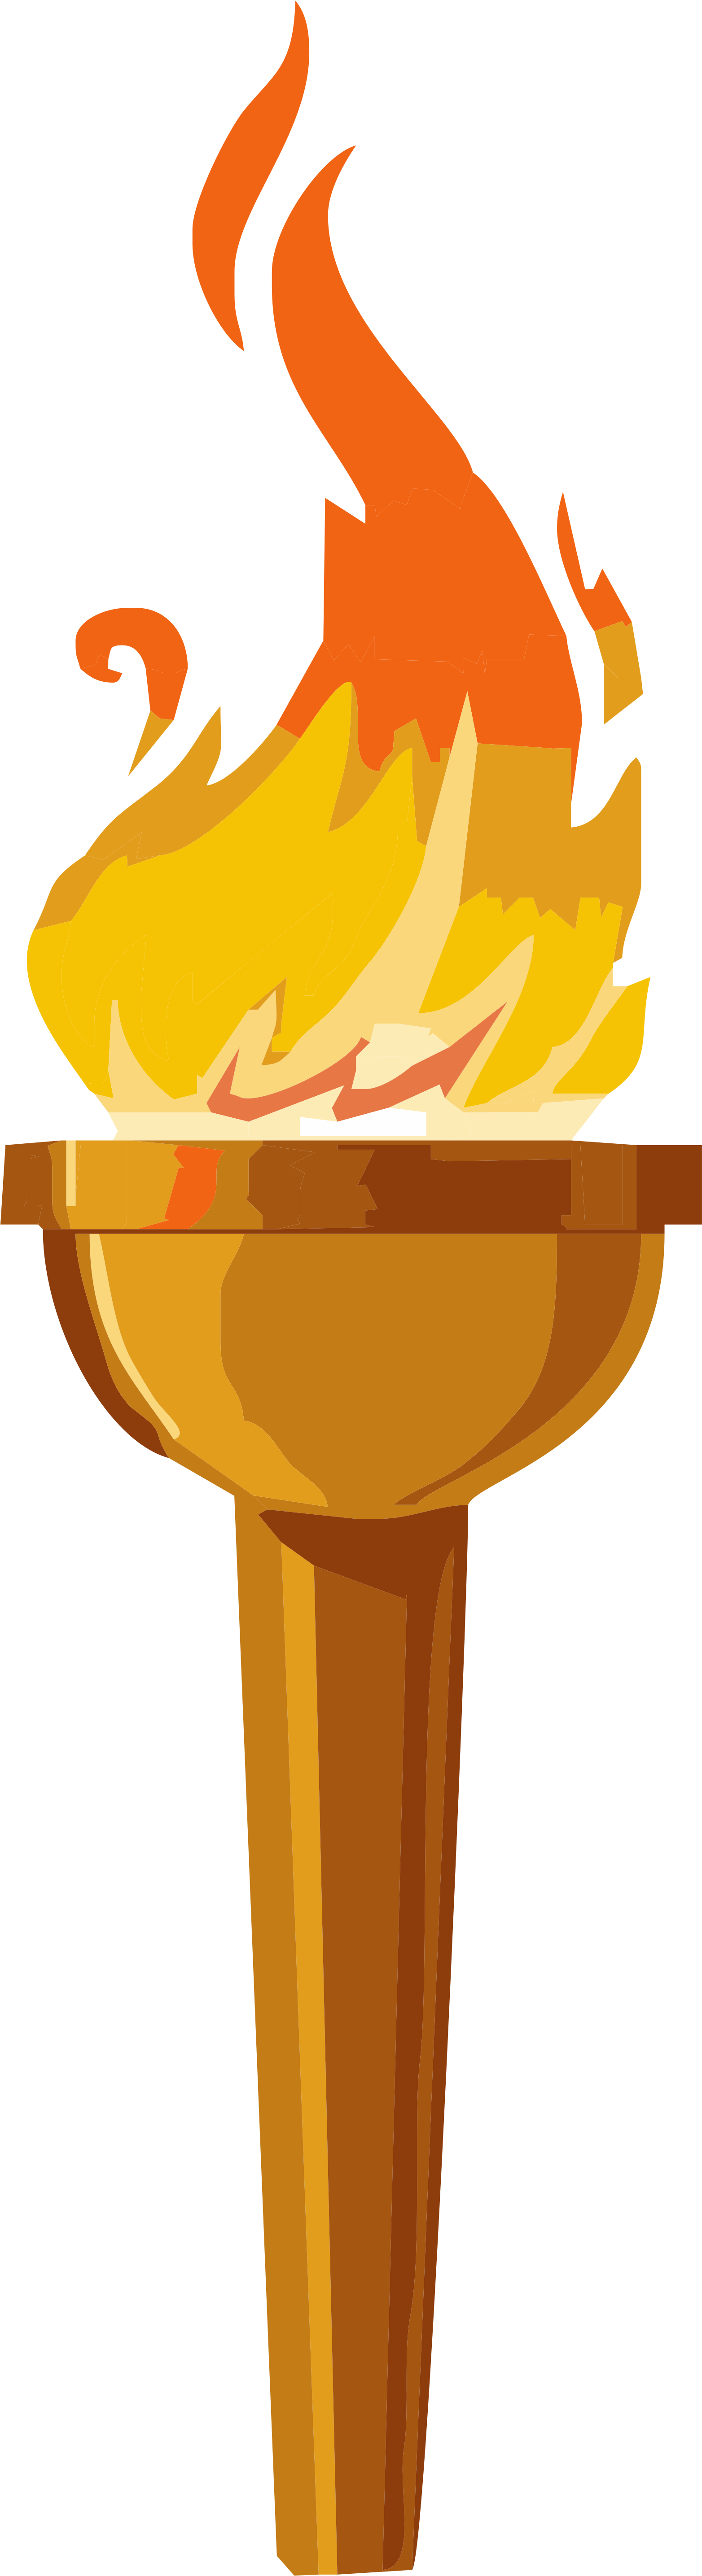 Olympic Torch PNG HD Quality